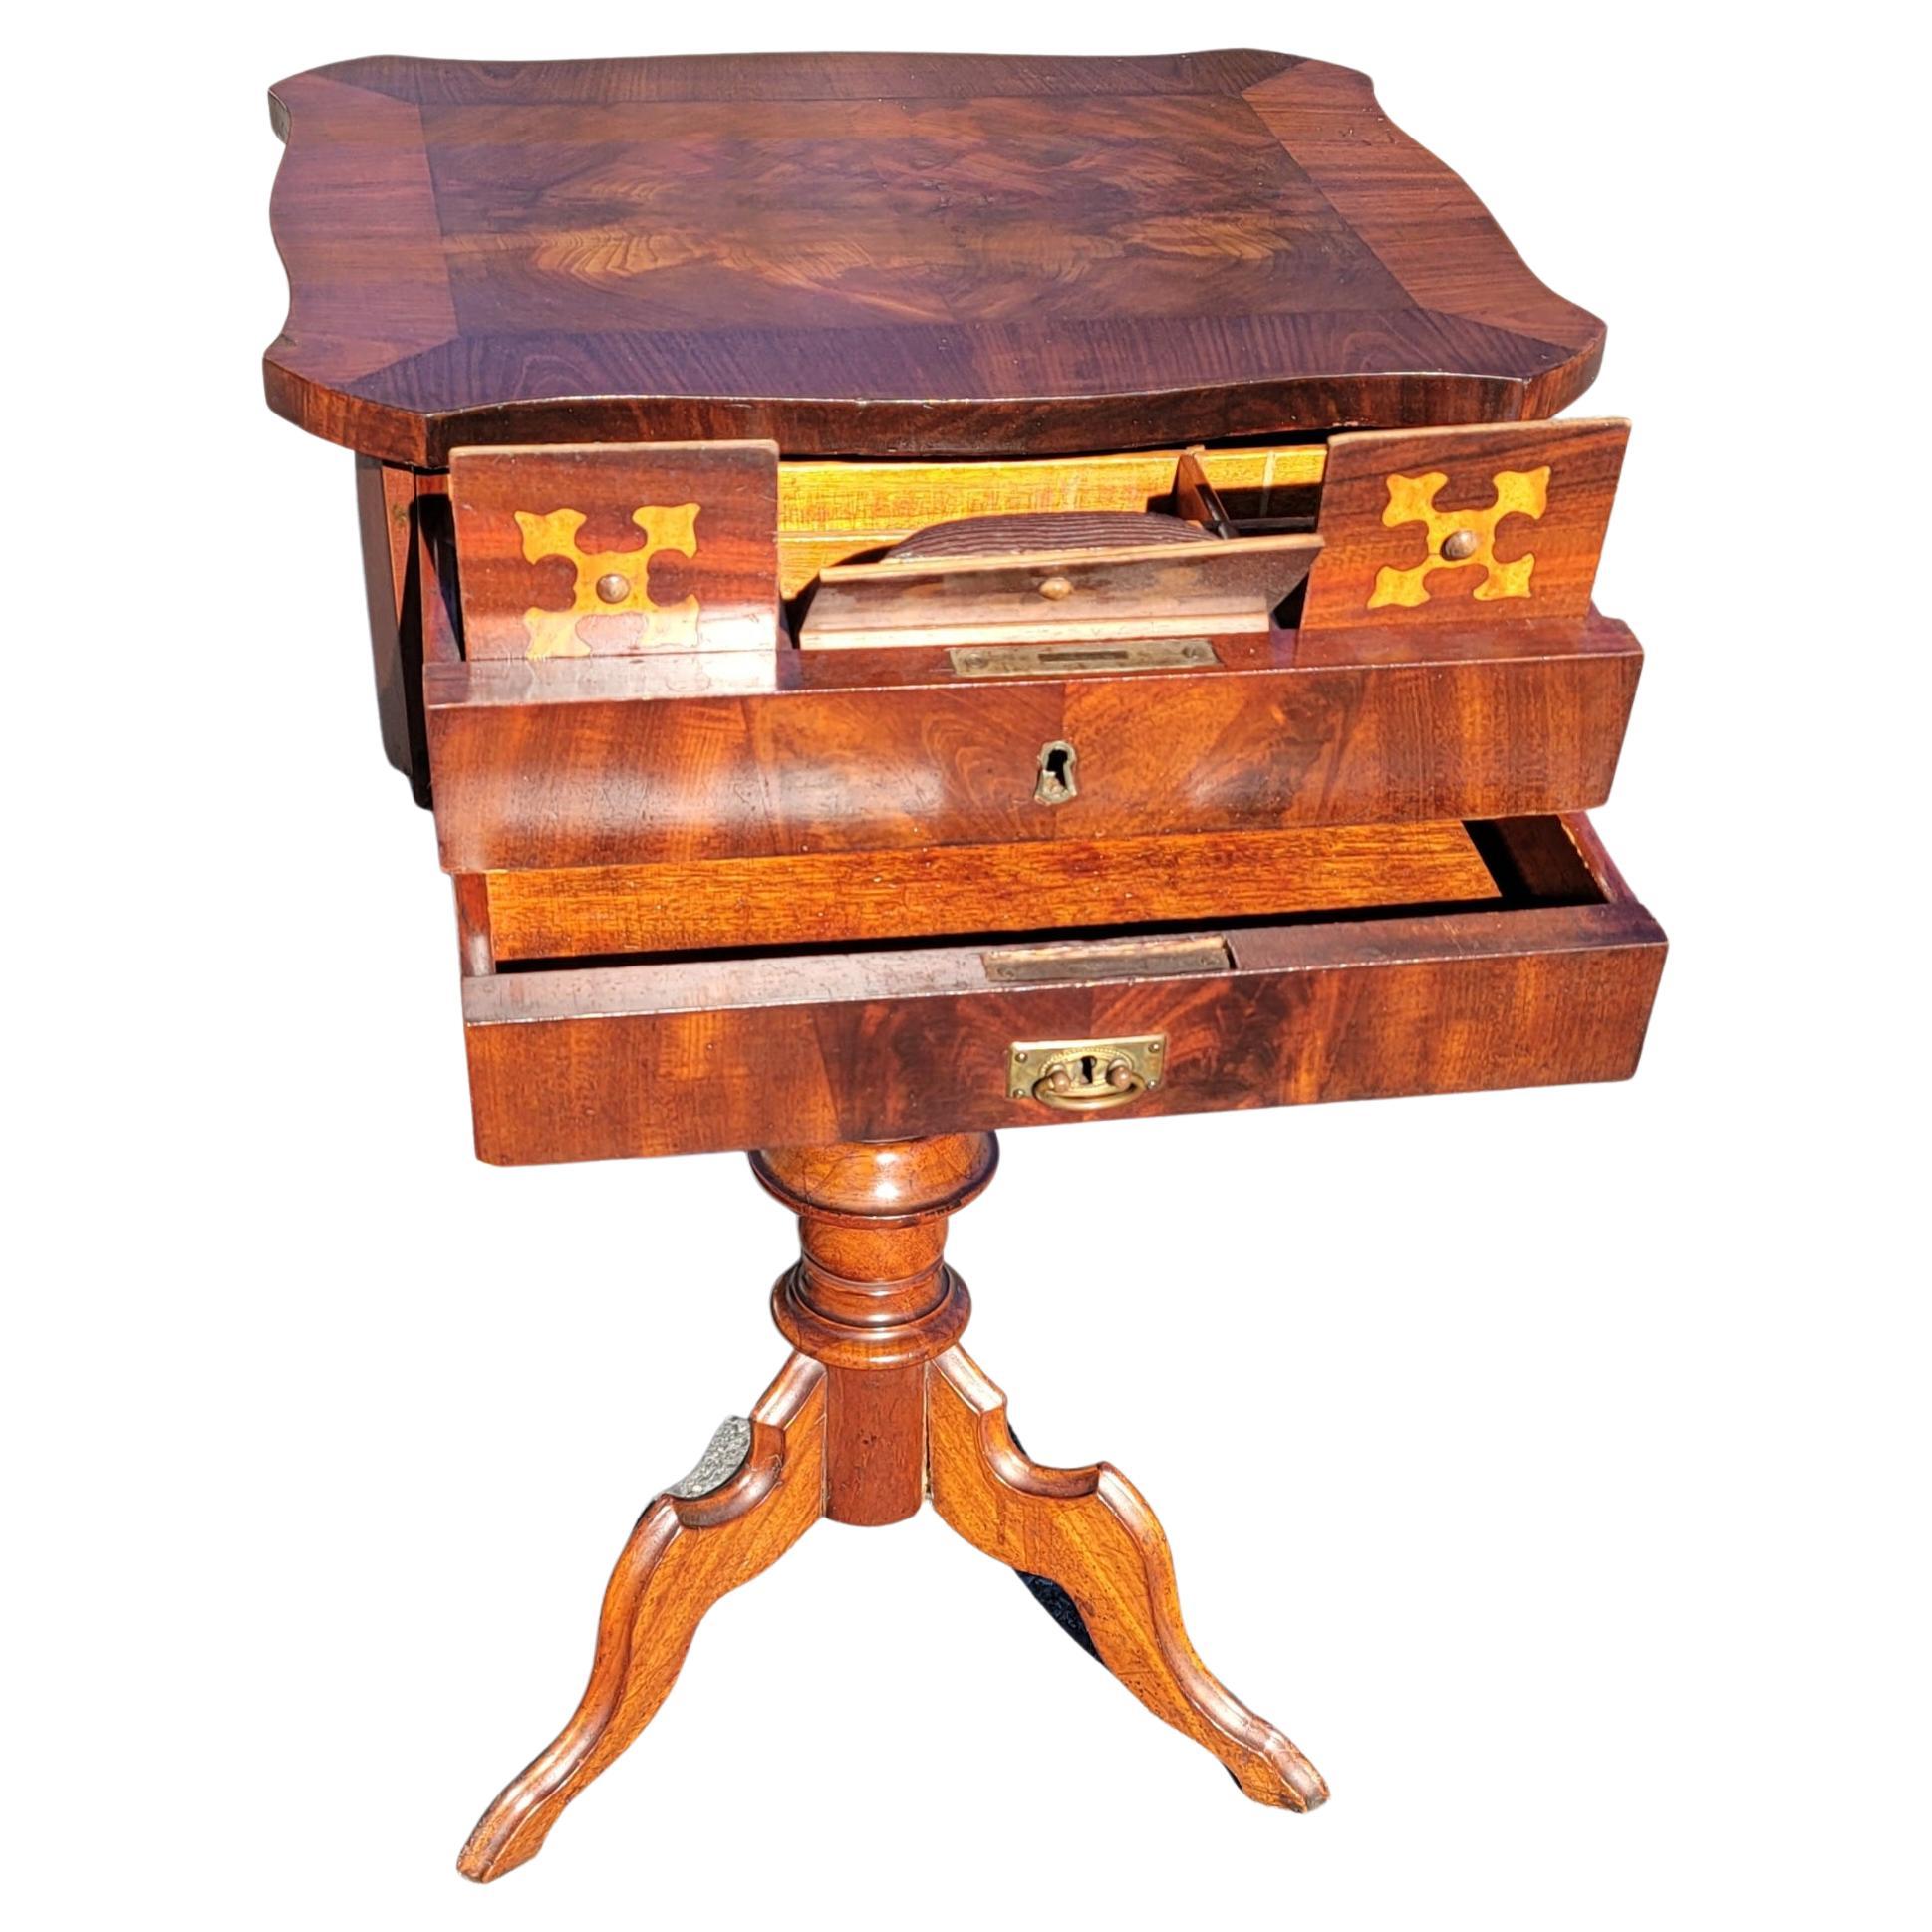 Biedermeier Flame Mahogany Pedestal 2-Drawer Side Table / Sewing Table, C. 1840 In Good Condition For Sale In Germantown, MD